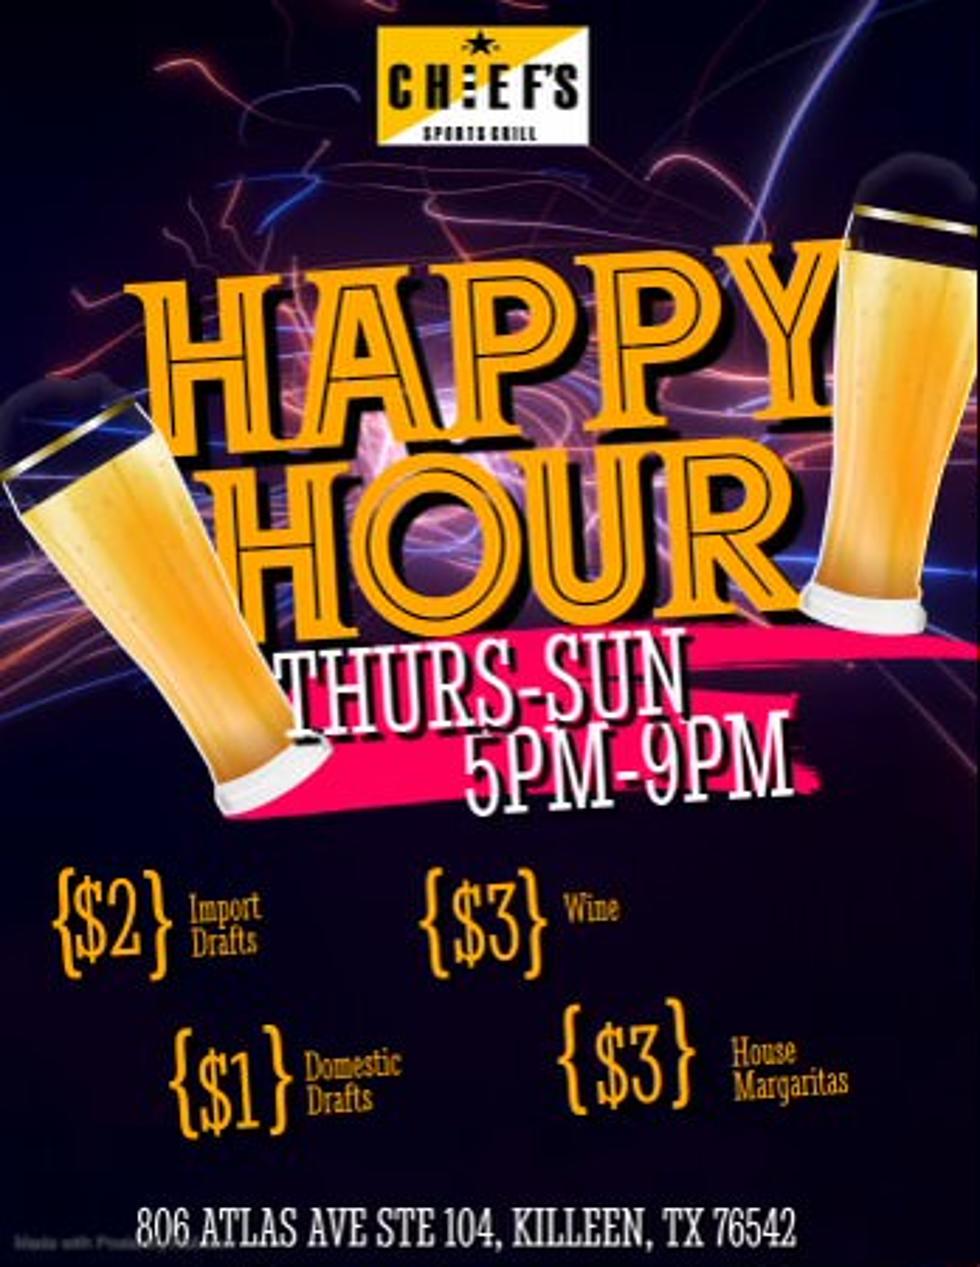 Chief’s Is Now Open For Happy Hour at 5PM Thursday Through Sunday